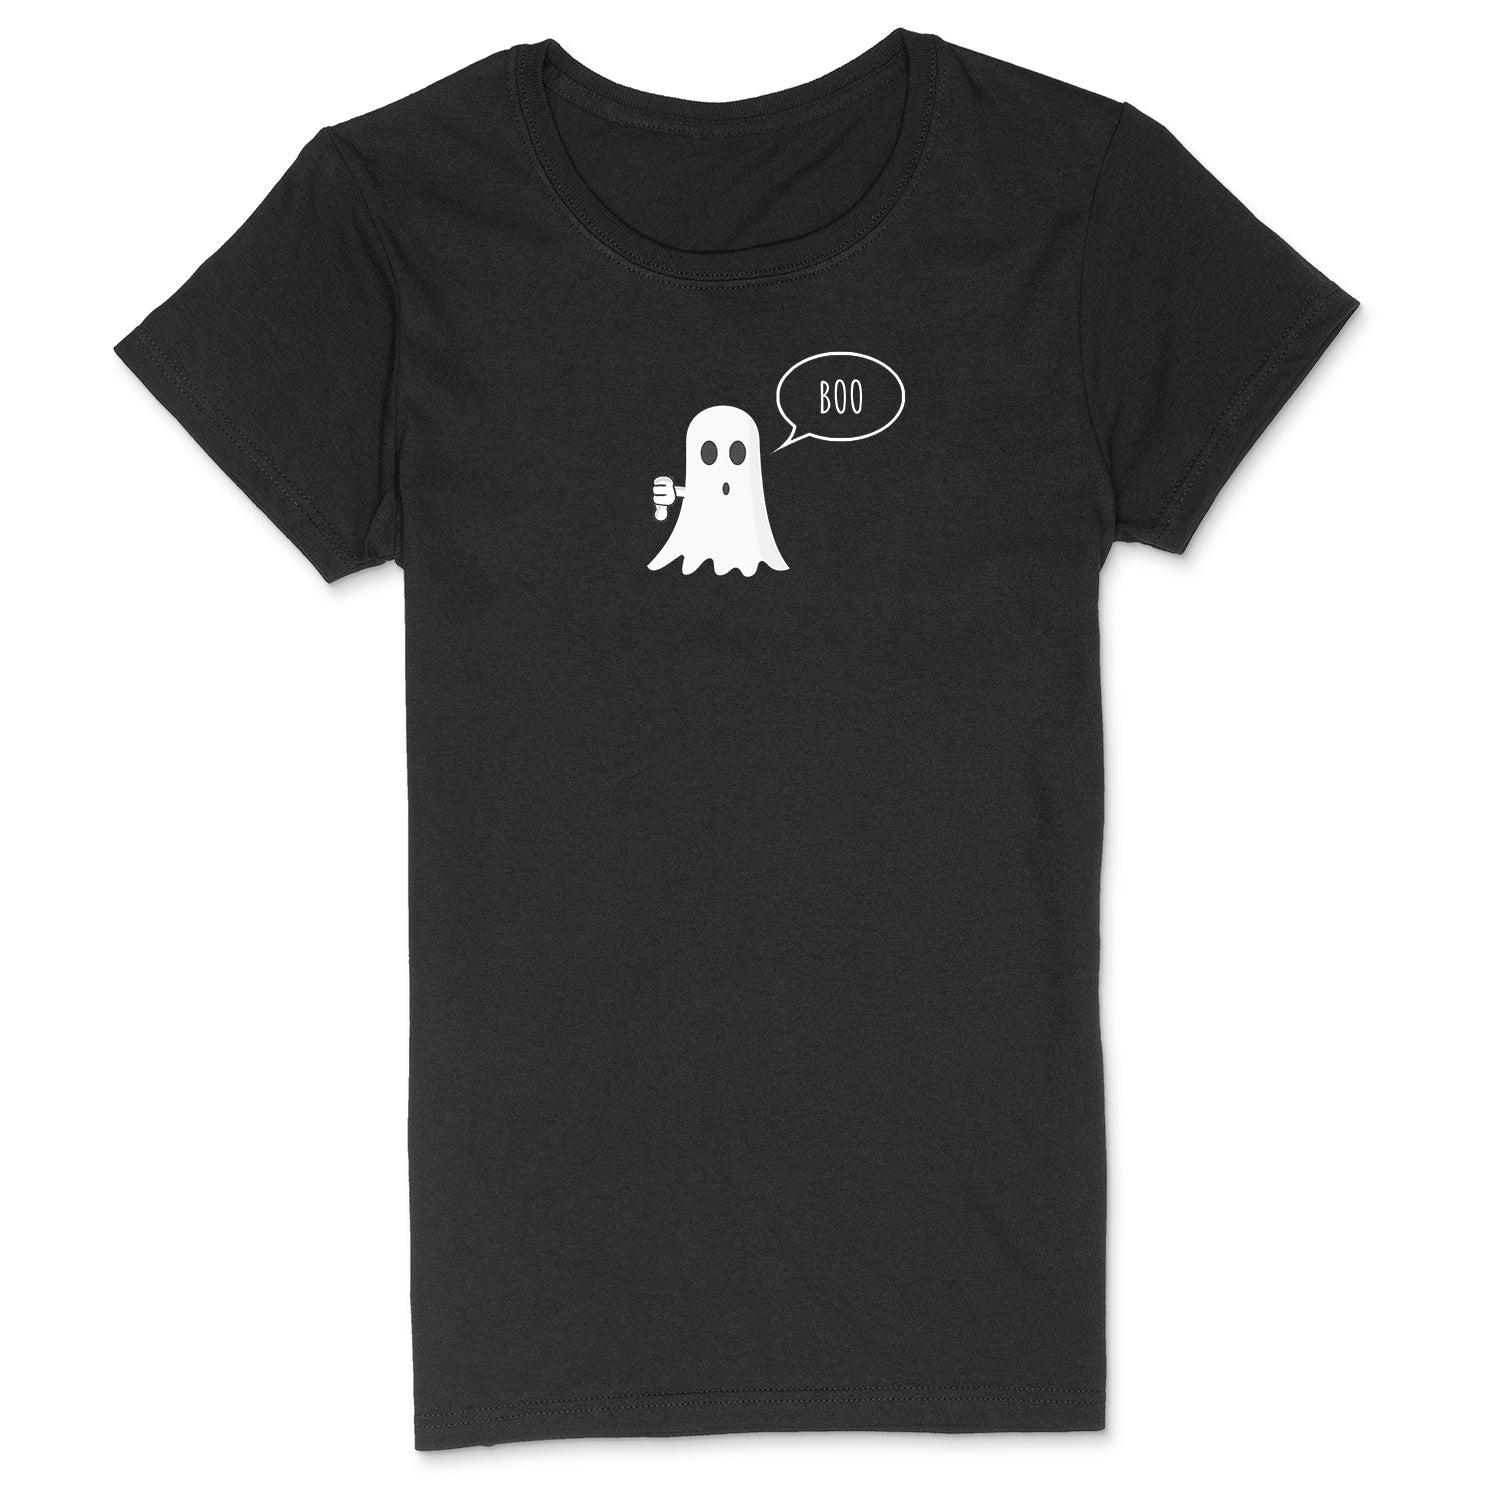 "Ghost Of Disaproval" Premium Midweight Ringspun Cotton T-Shirt - Mens/Womens Fits